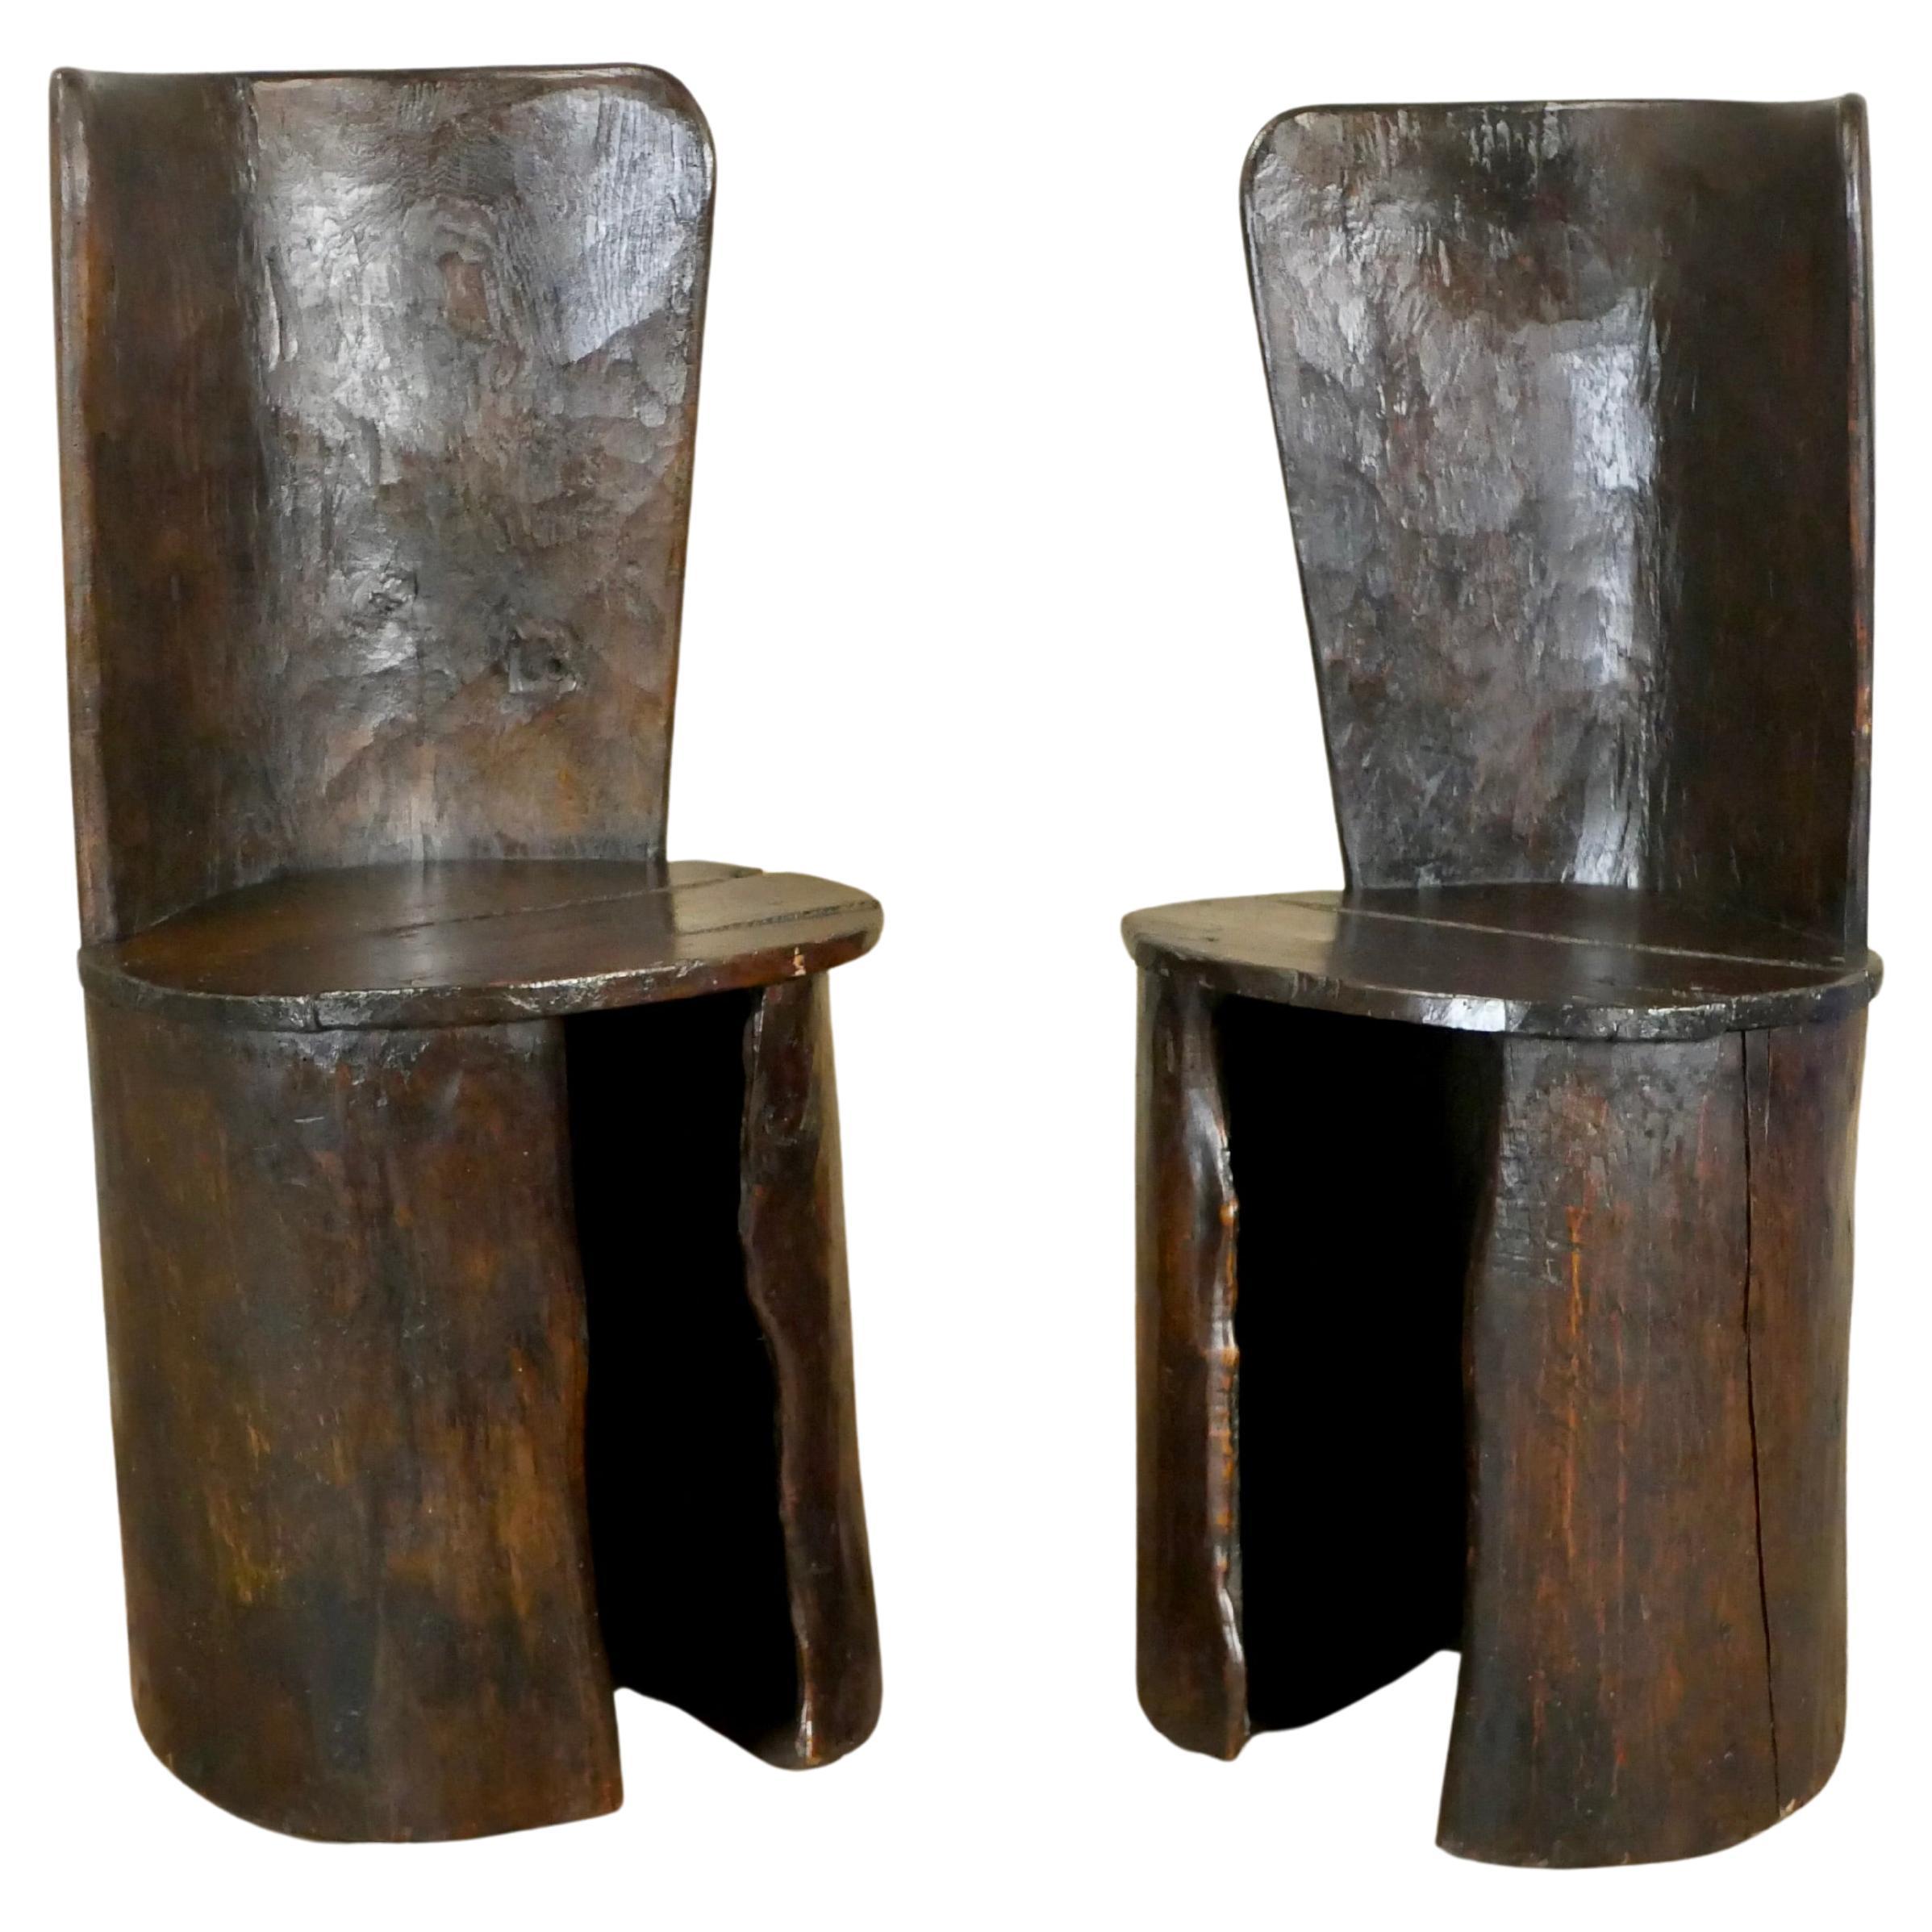 Pair of brutalist trunk tree chairs made in Bretagne, France, 1950s